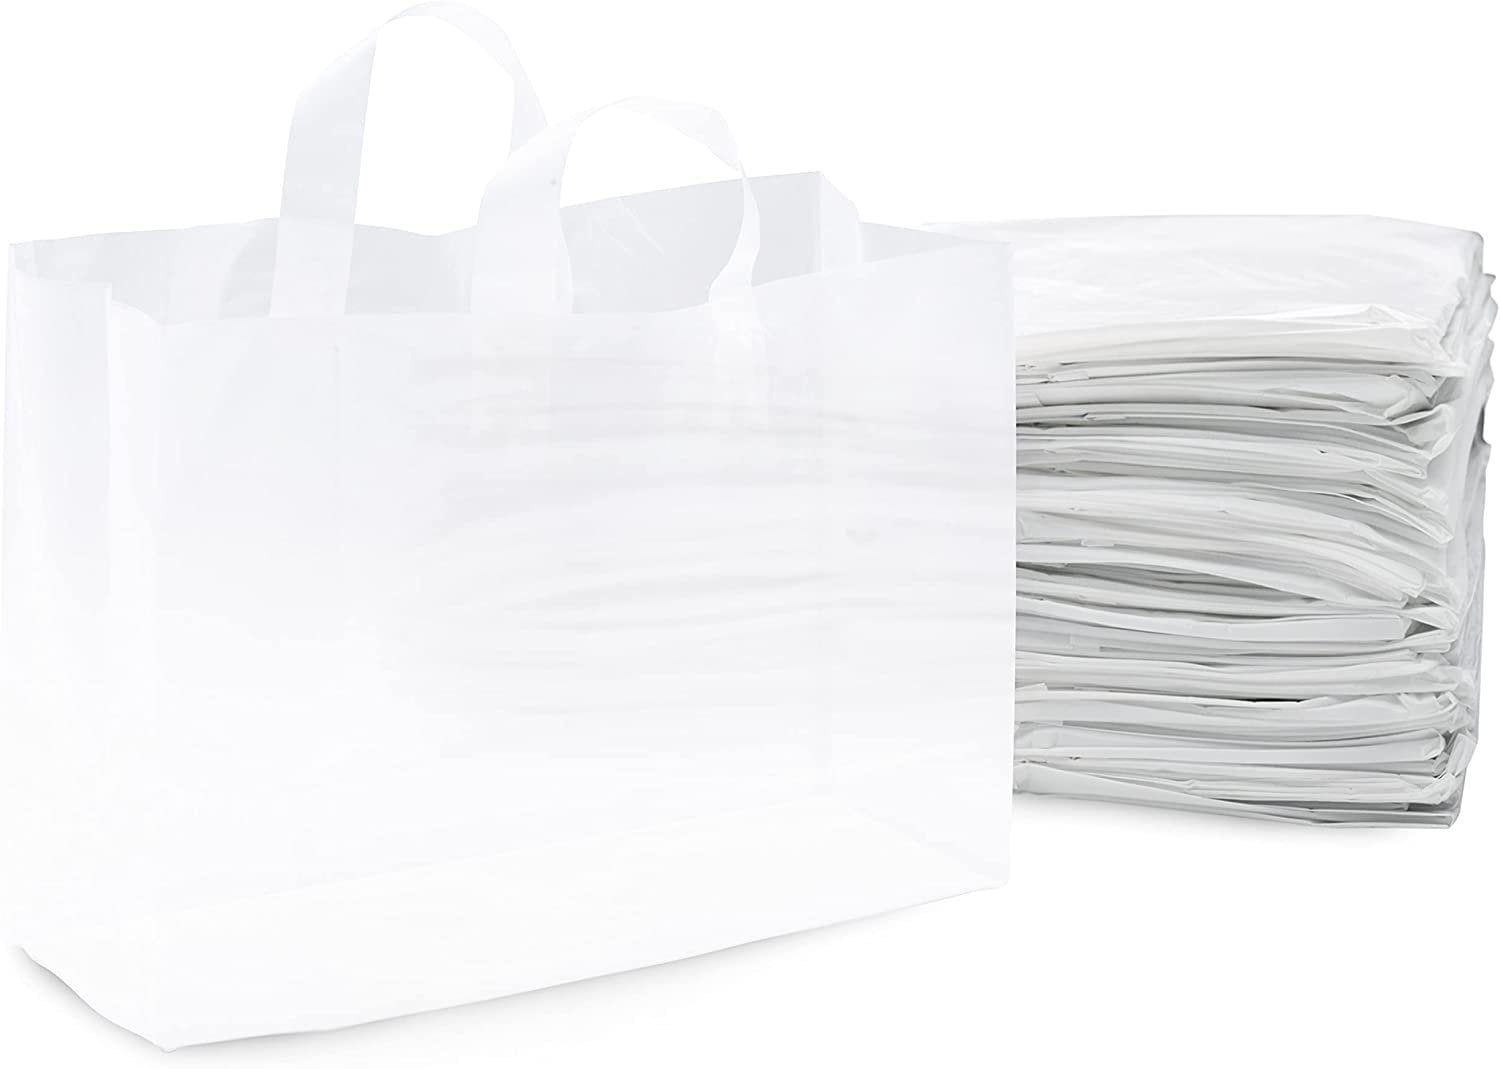 Coated Paper Bags Are An Excellent Choice For Businesses Looking For An  Eco-friendly, Durable, And Aesthetically Pleasing Shopping Bag Option |  Nice Gift Box